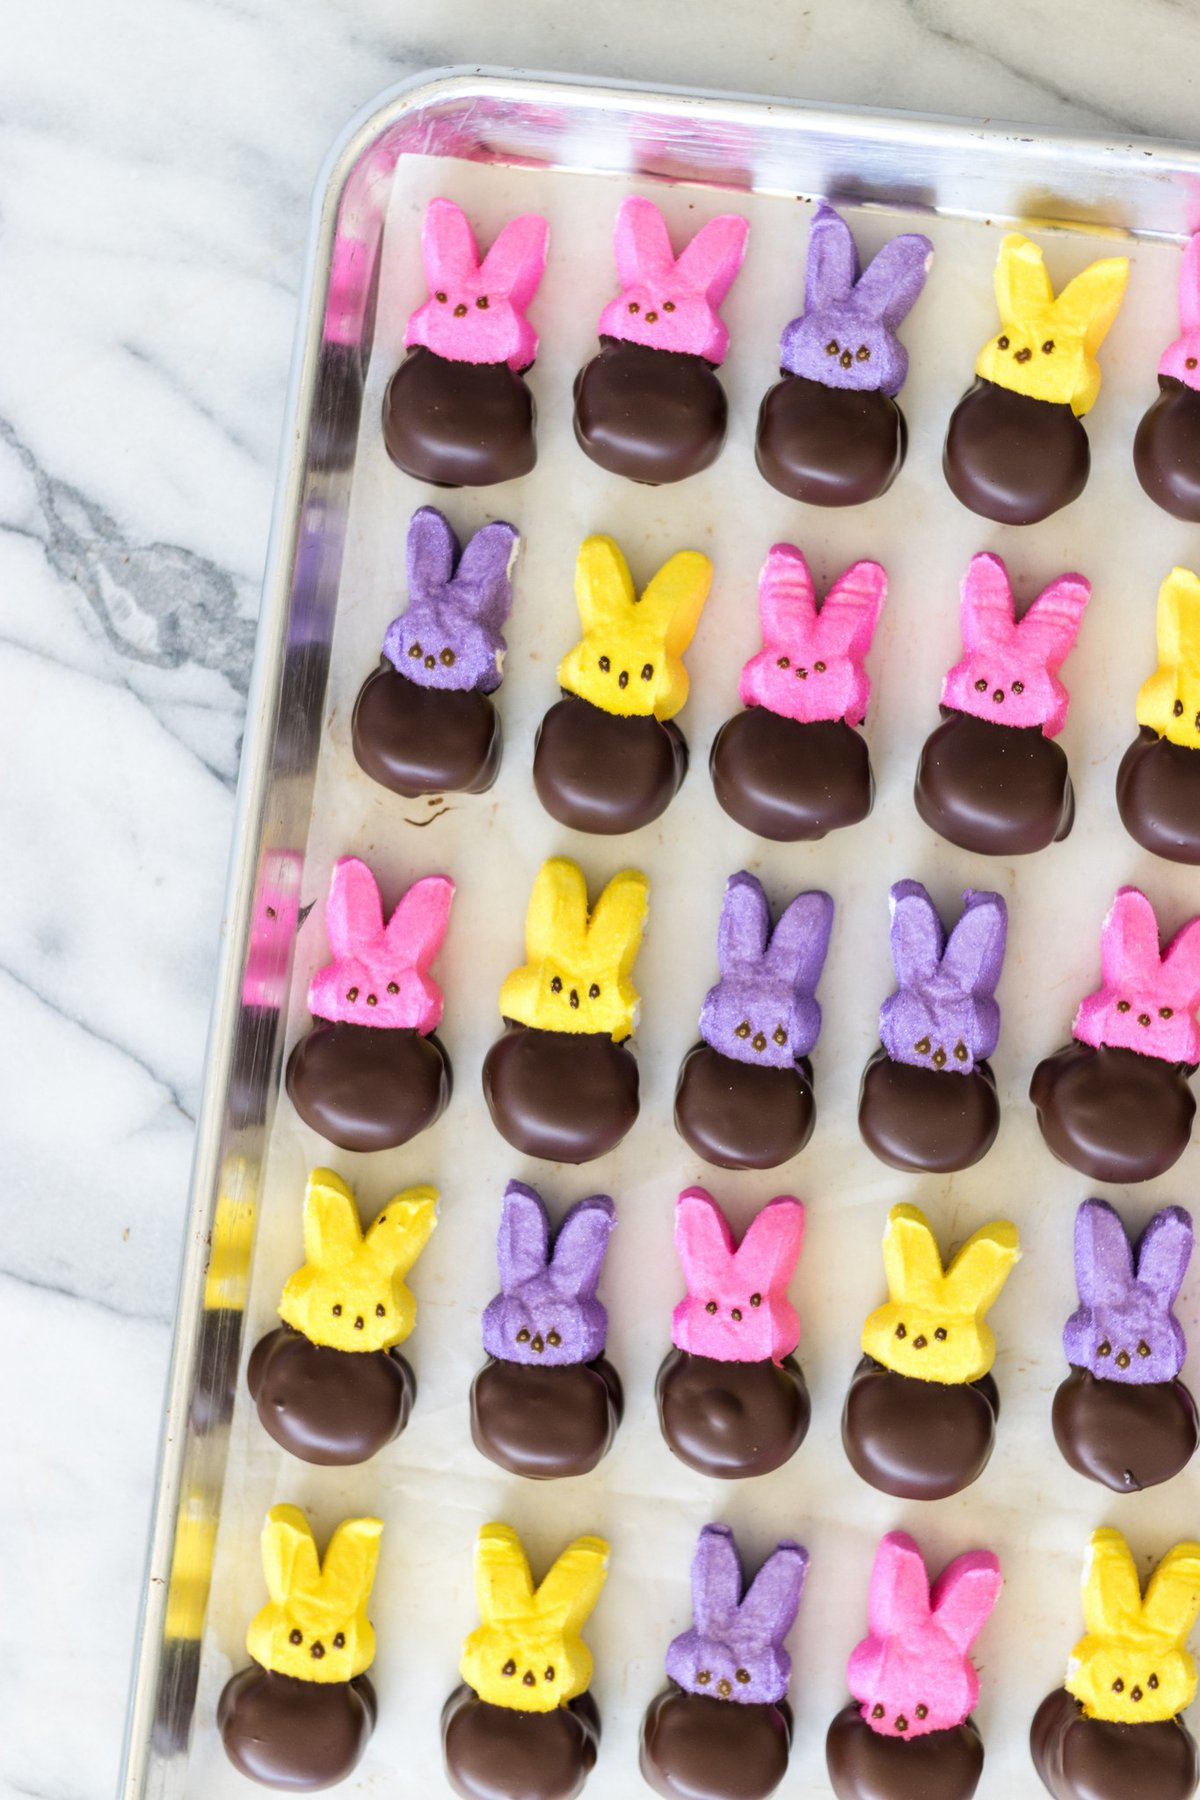 Chocolate dipped Peeps from Compartés Chocolatier.